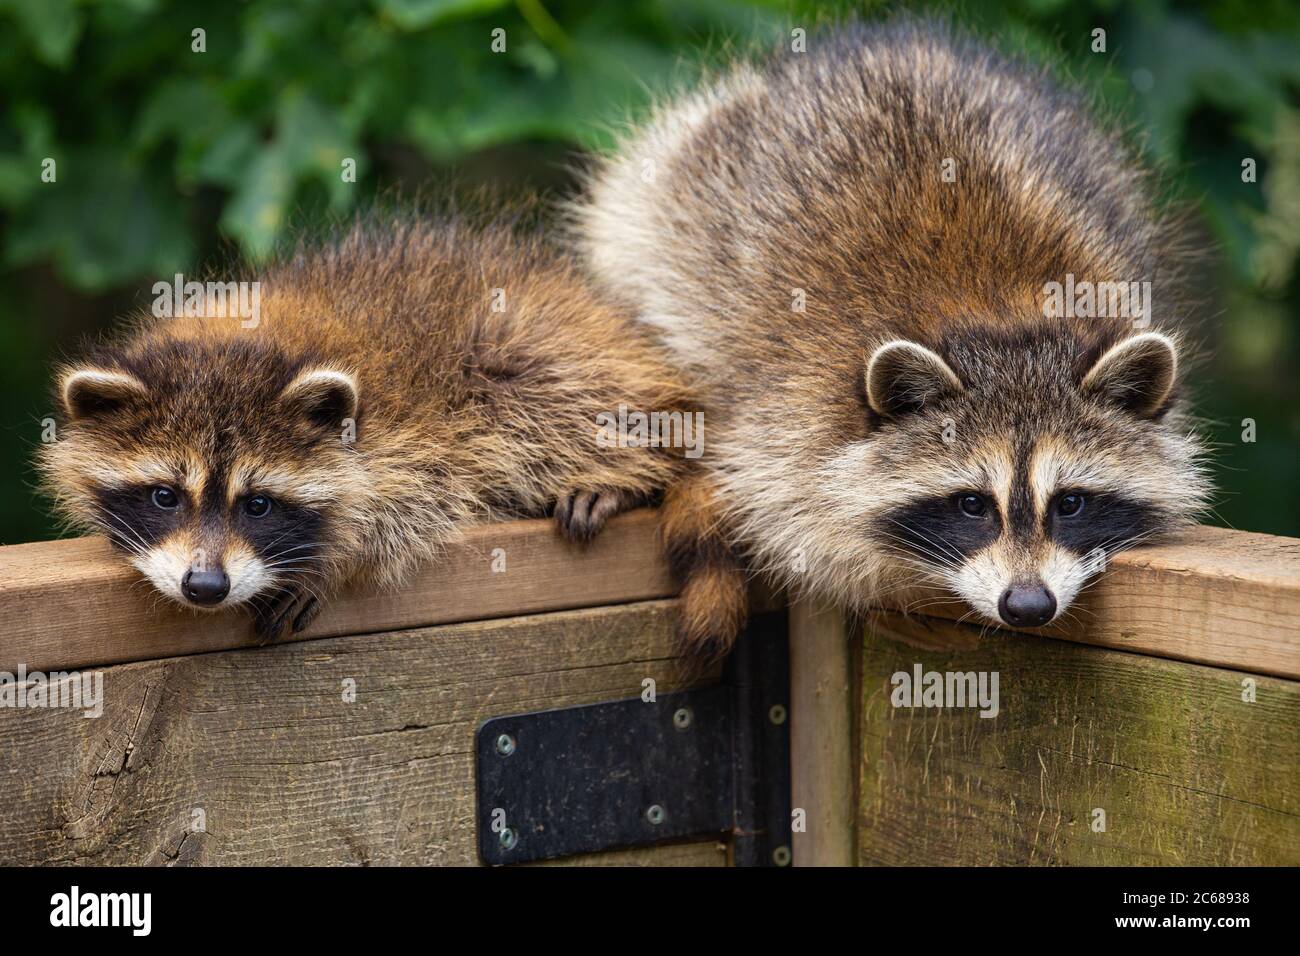 Two baby raccoons perched on weathered wooden deck railing. Stock Photo